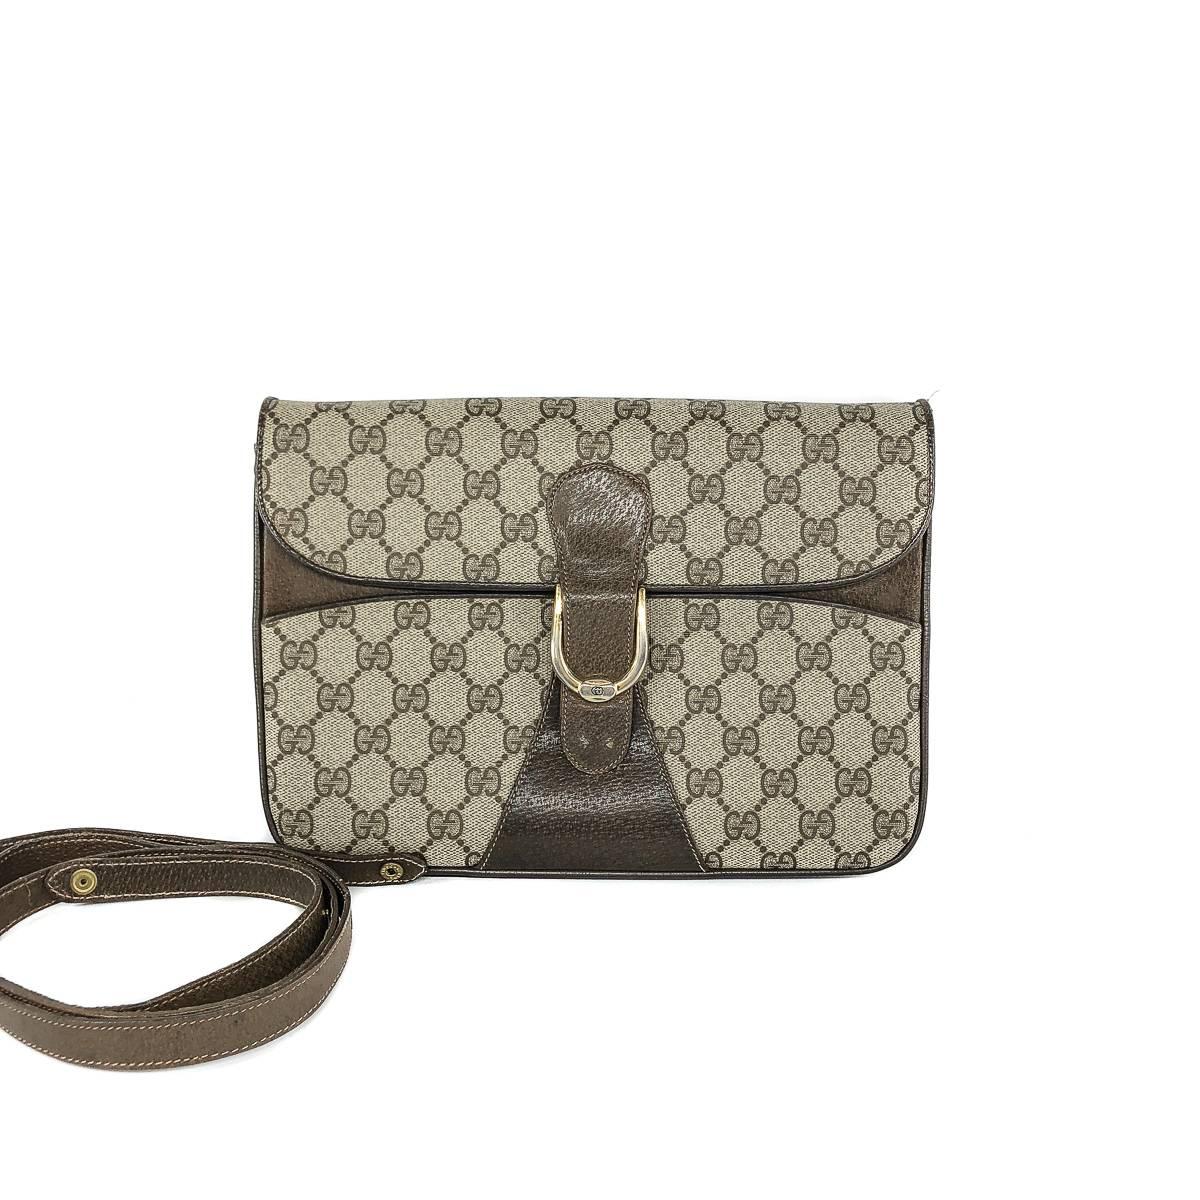 Gucci monogram prints are having a total comeback, and we definitely understand the appeal! This classic bag is so stylish and chic, you can dress it up or down as a clutch or shoulder bag and enjoy multiple wears. The interior features one zipped